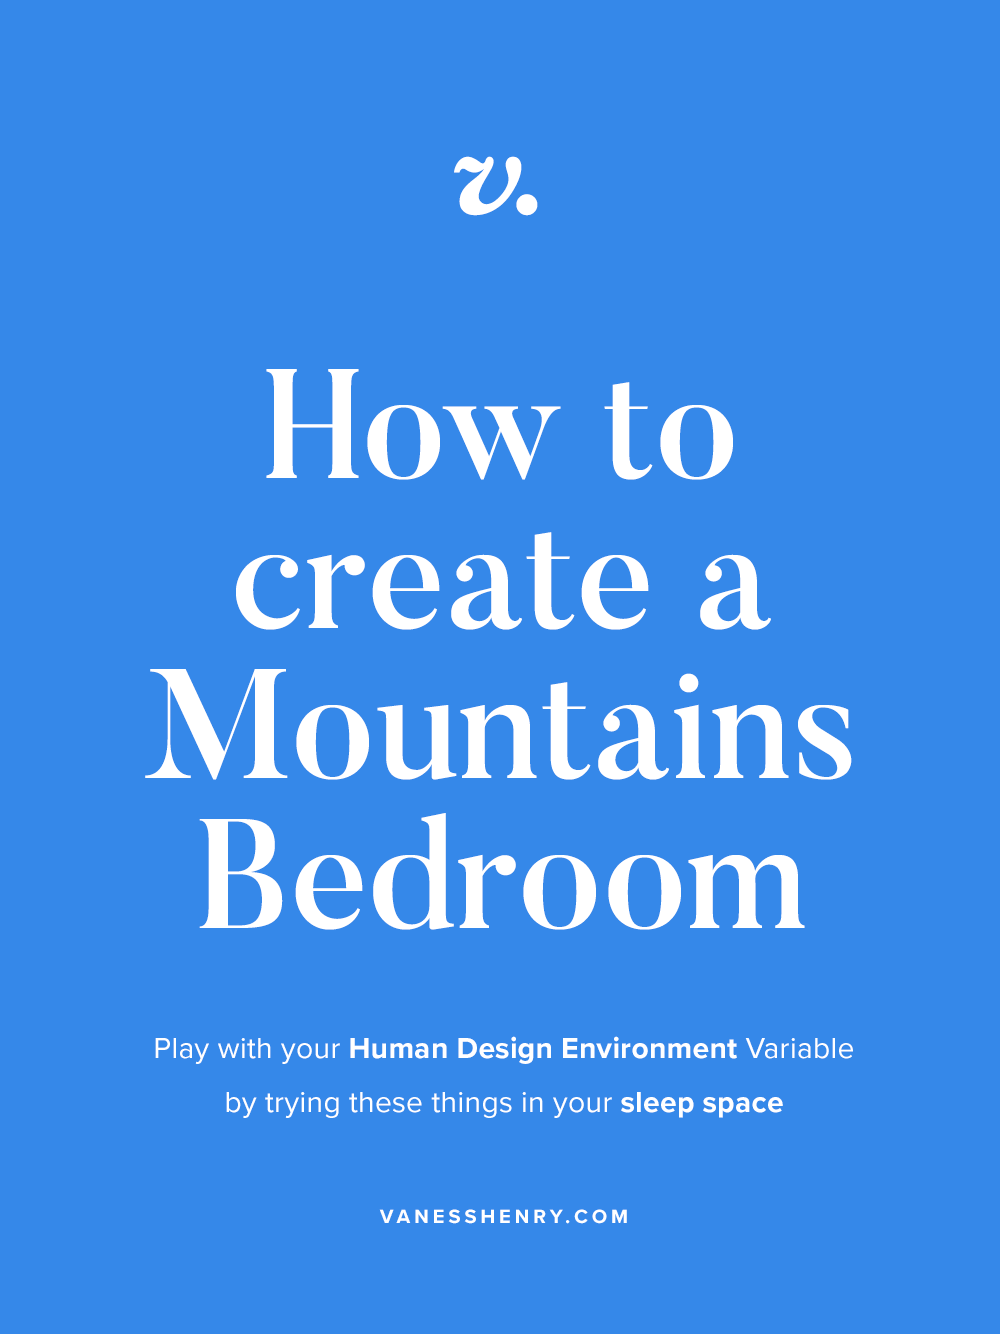 Mountains Bedroom Blog Post.png